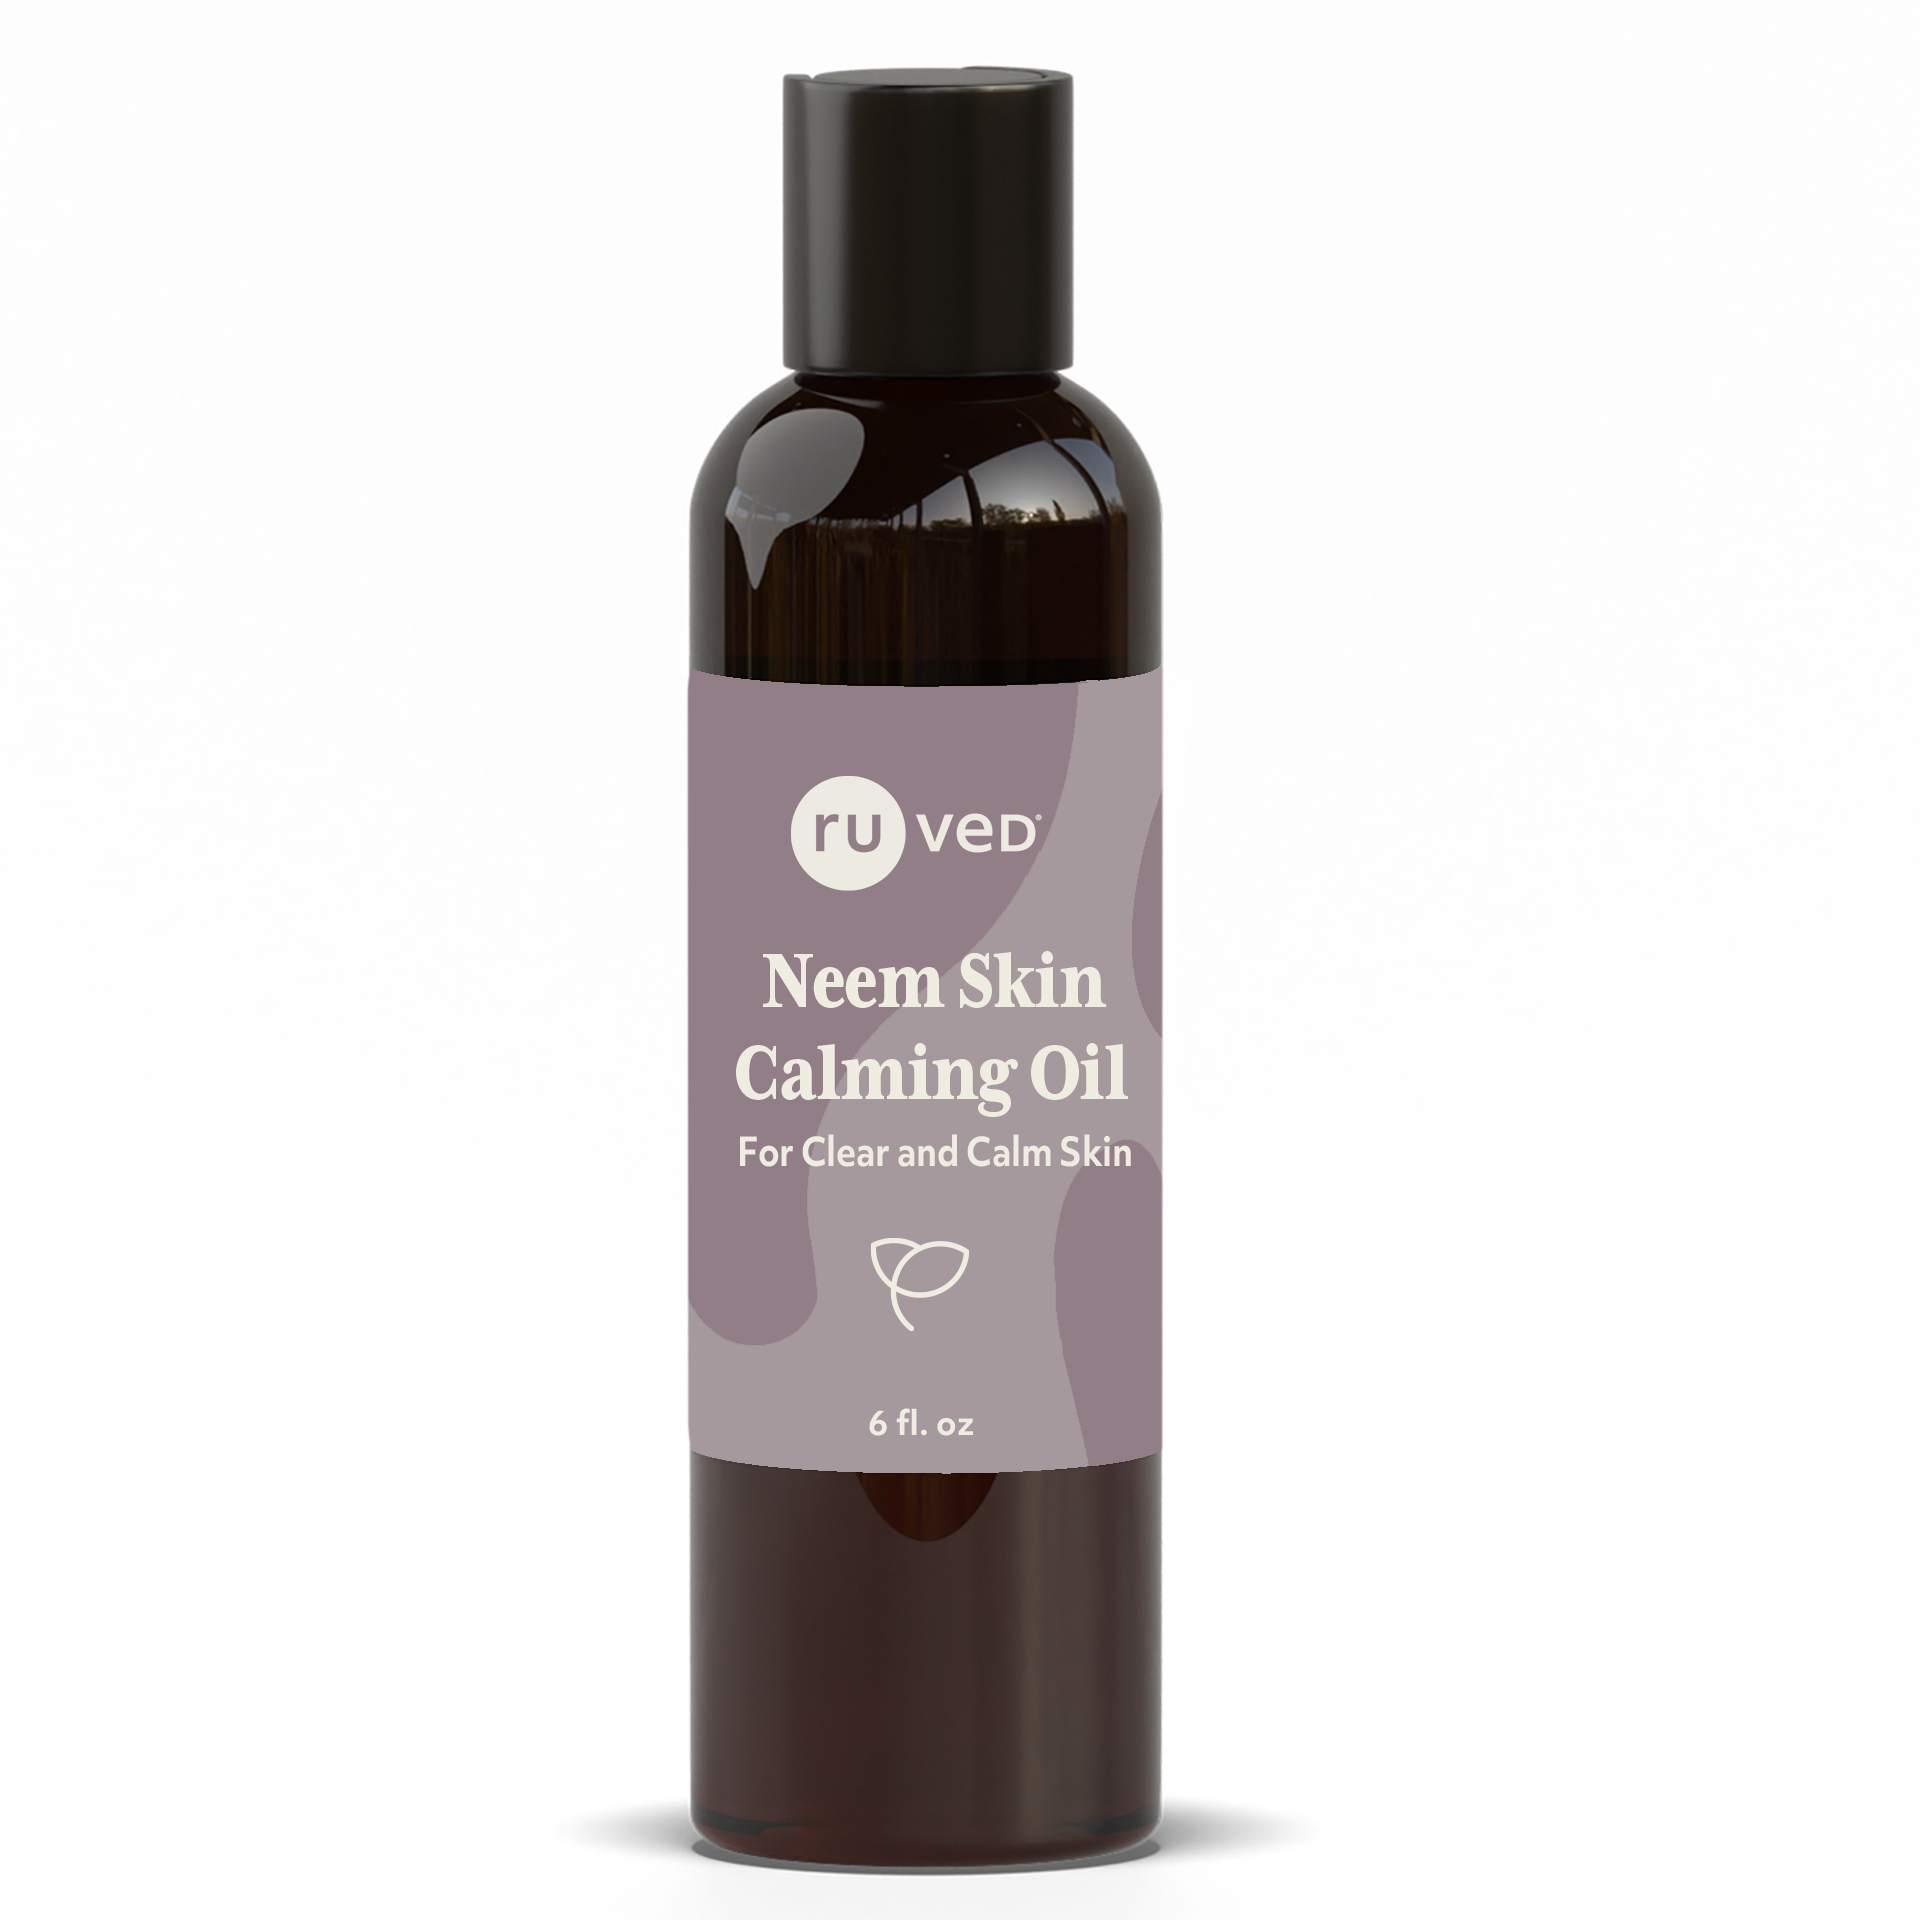 Neem Skin Calming Oil - Luxurious blend of natural oils to Calm and rejuvenate skin, promoting a radiant, cool appearance. 100ml Bottle.